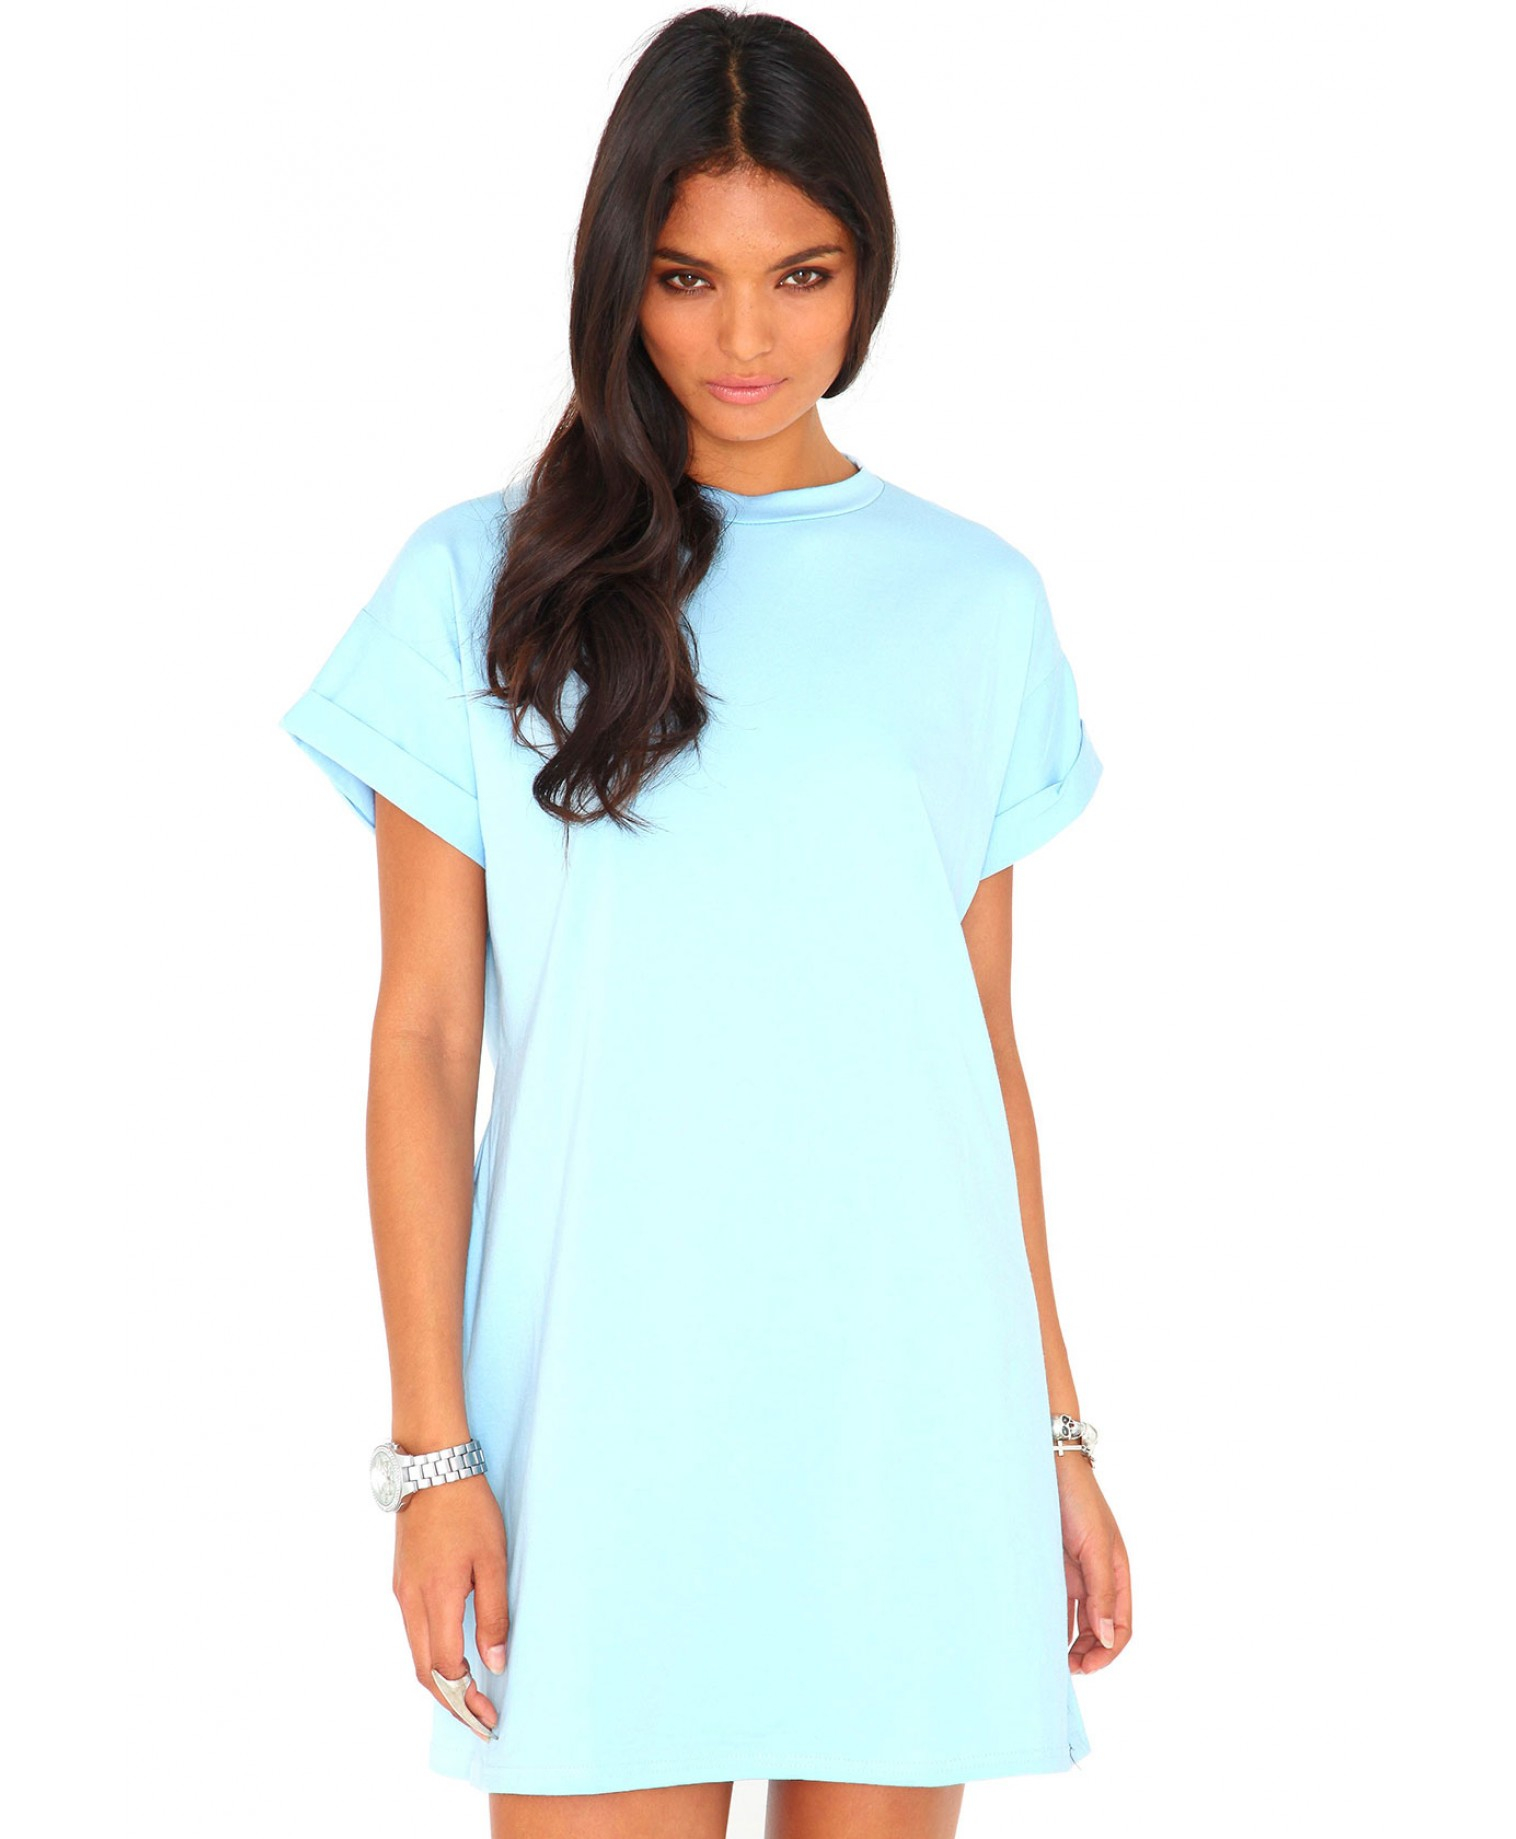 Cheap oversized t shirt as a dress pay later credit